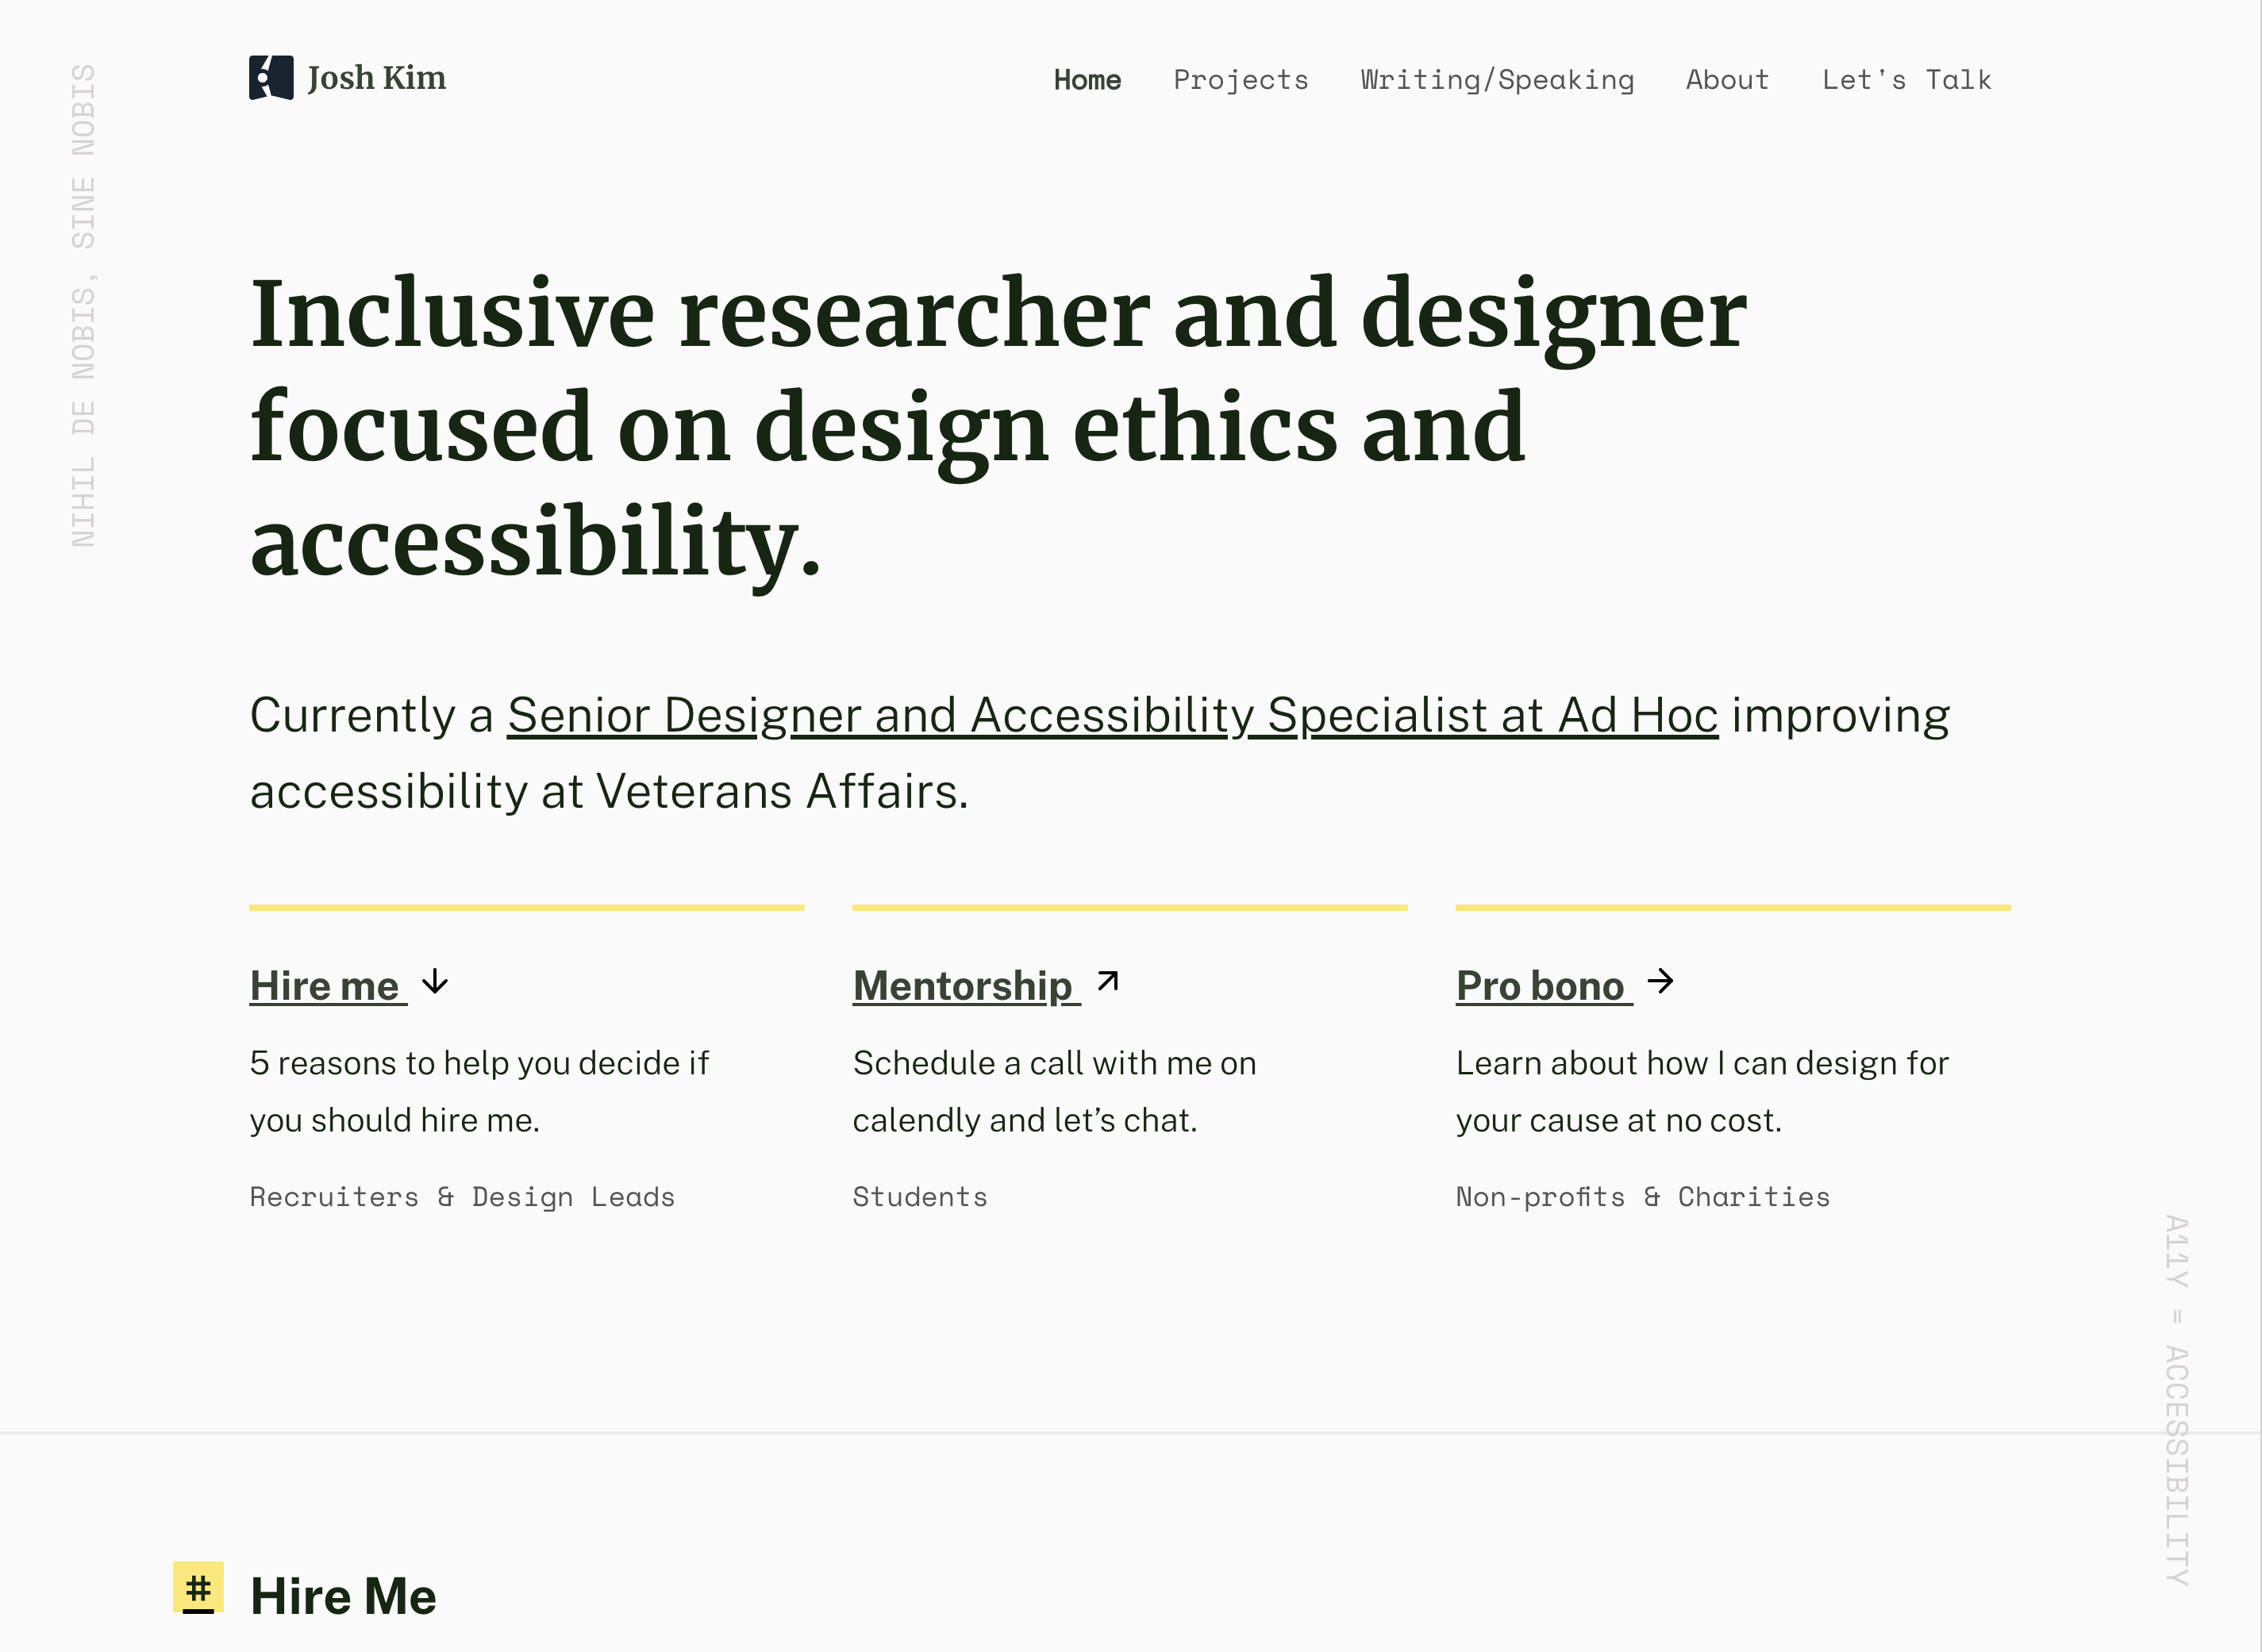 Research More About Accessibility